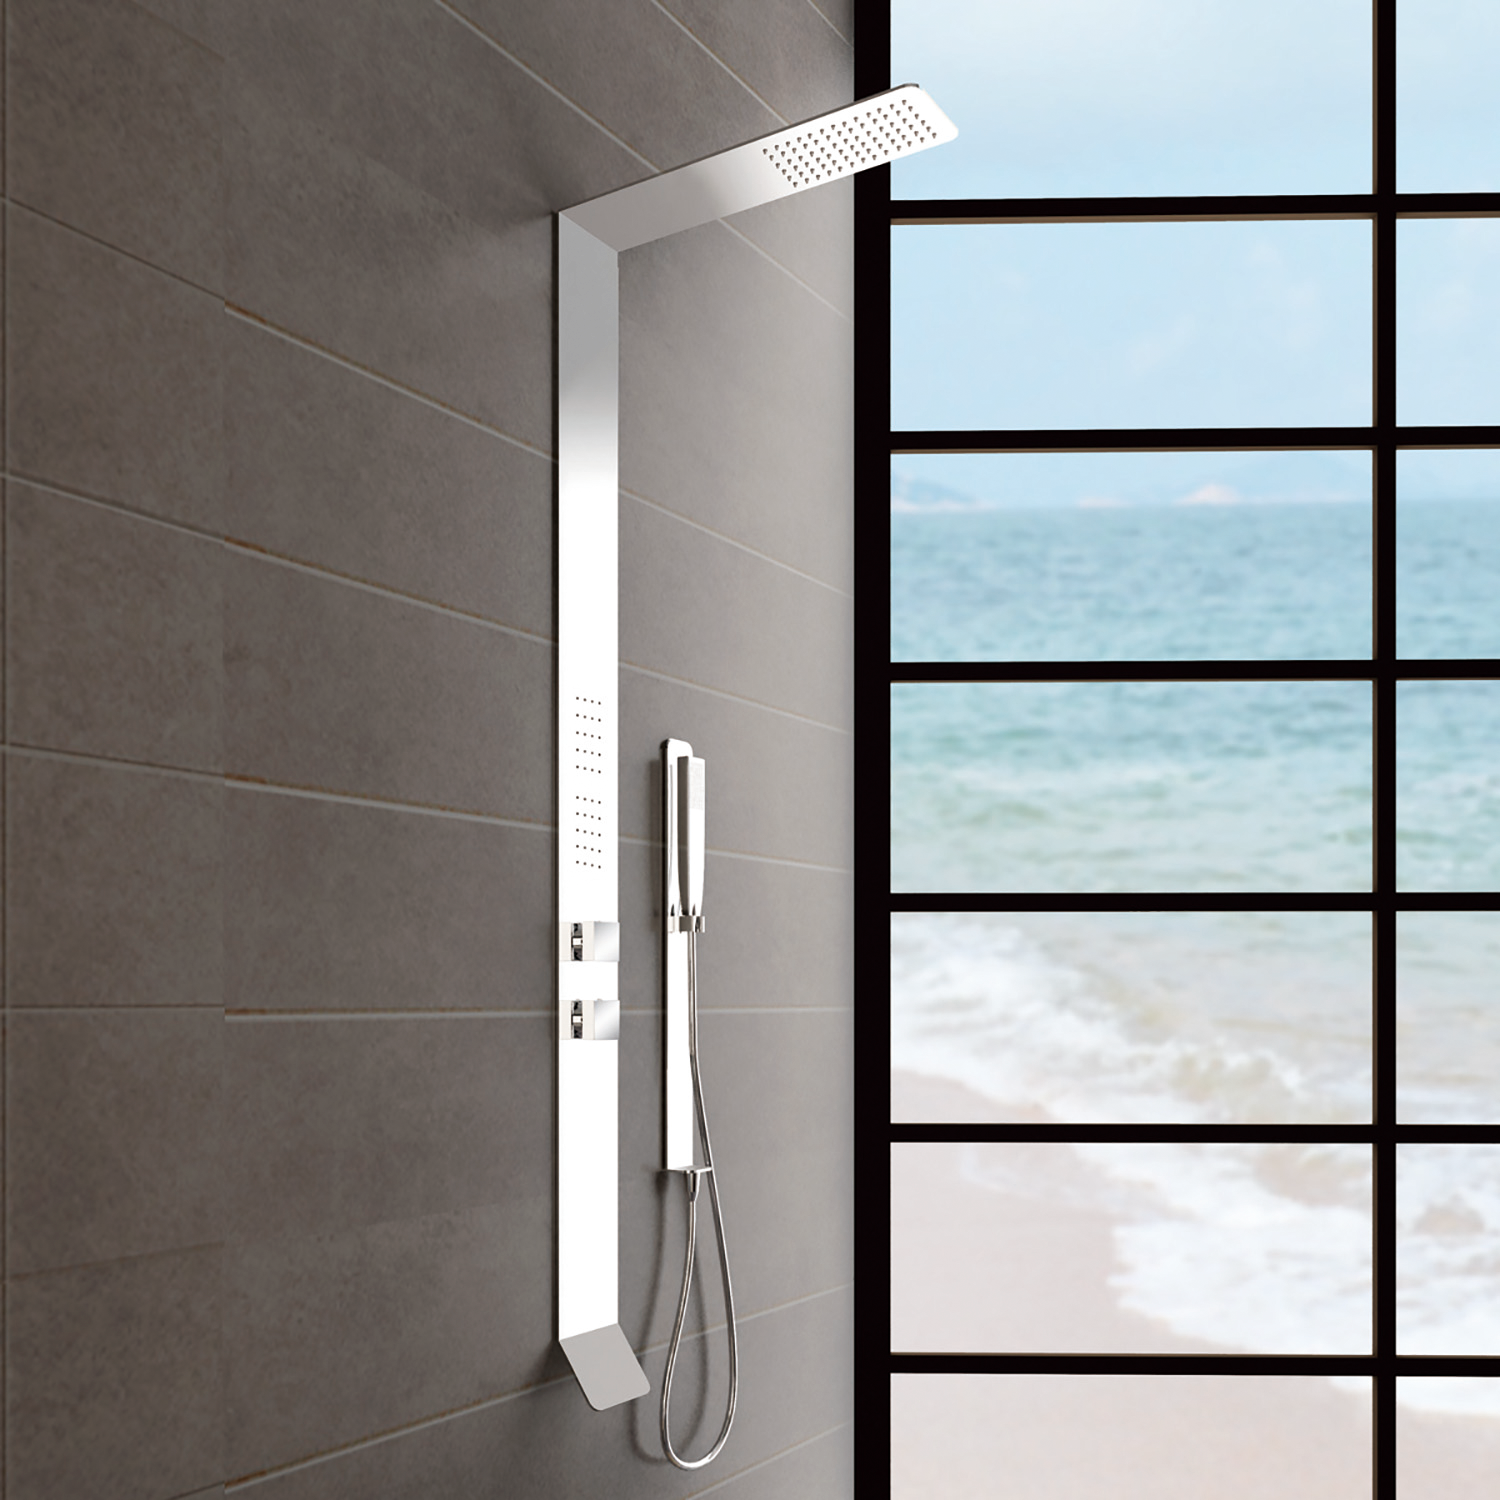 DAX Brushed Stainless Steel Shower Panel With Pressure Balance Valve (DAX-034)